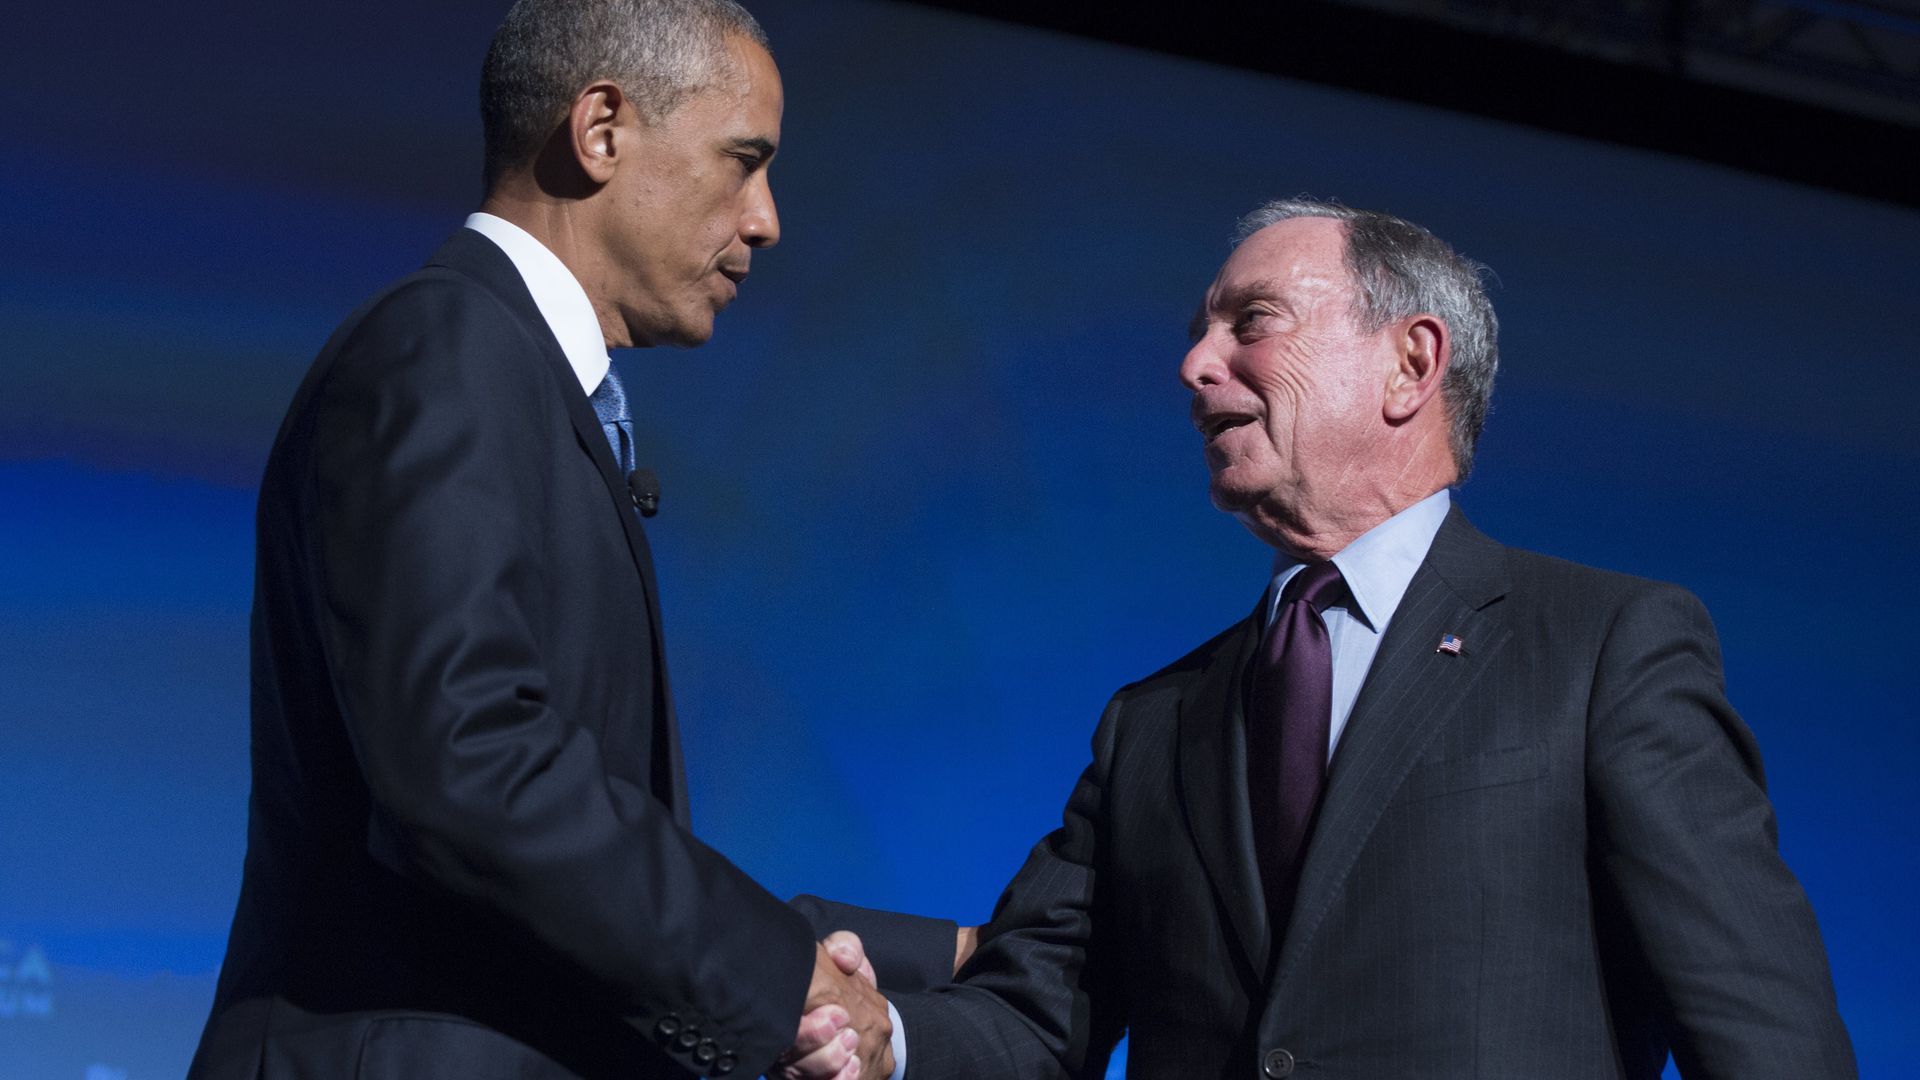 Obama and Bloomberg